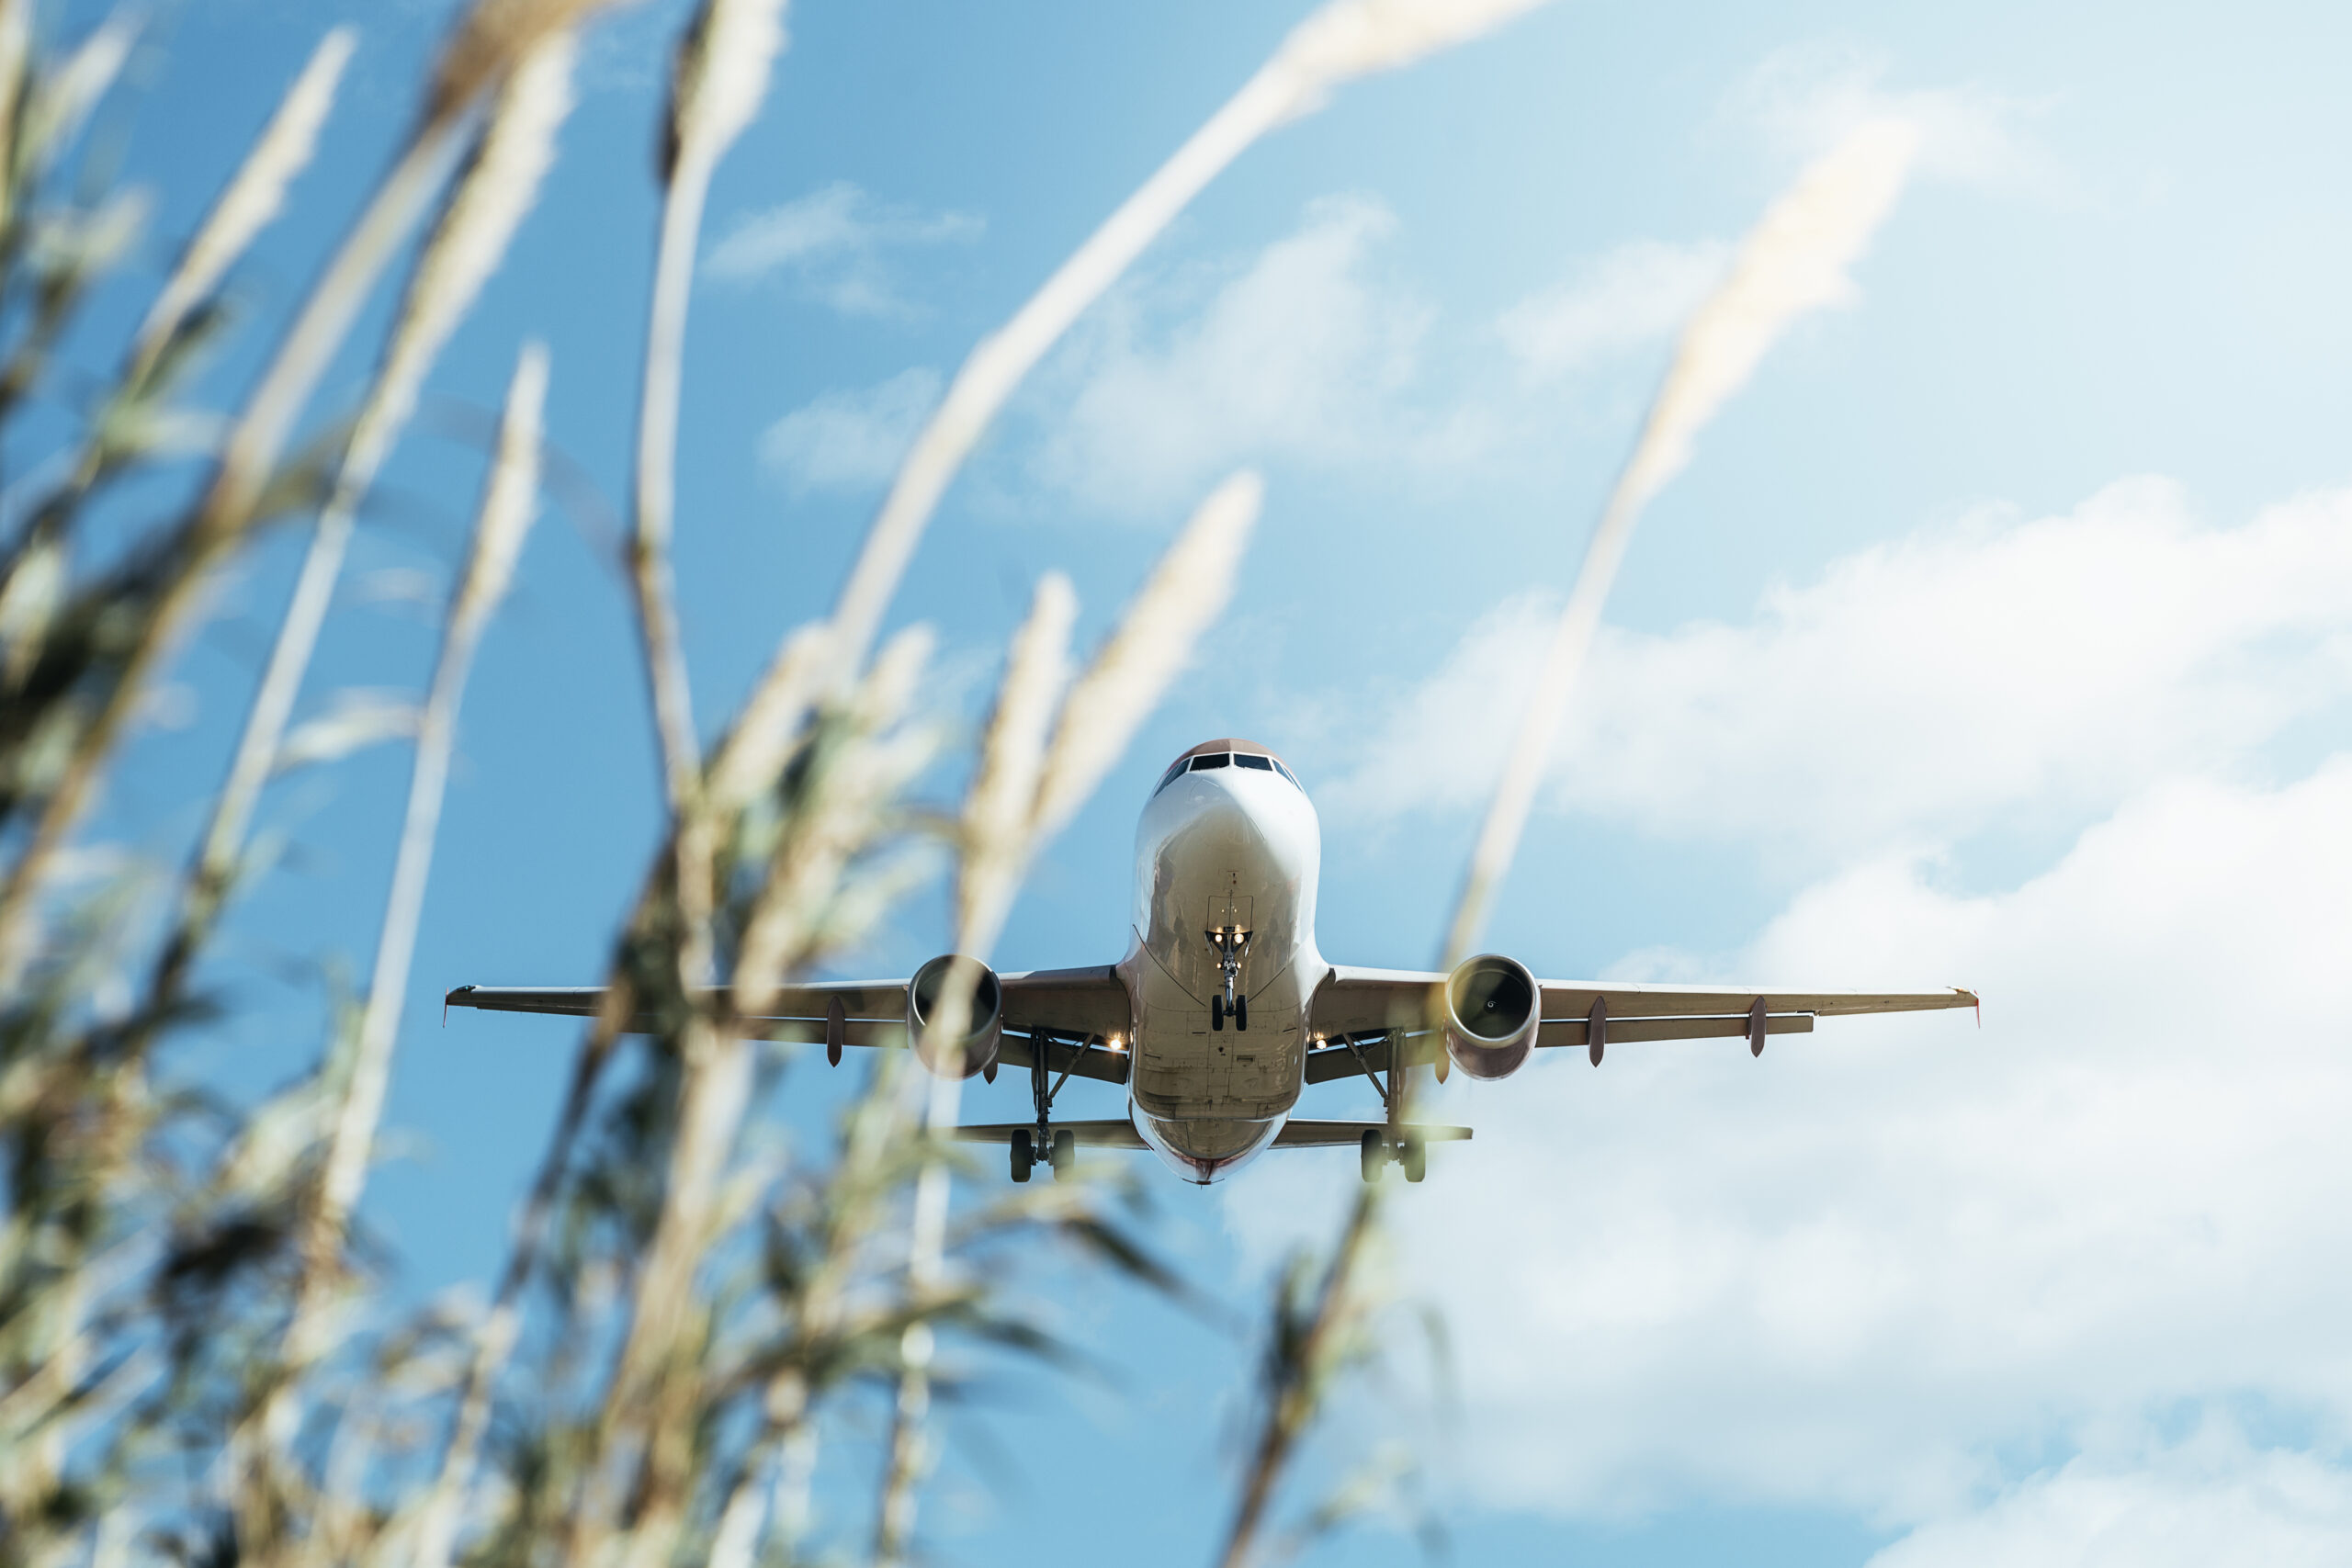 Biofuel leaders are seeking certainty from the Treasury Department when it comes to U.S. production of sustainable aviation fuel (SAF).